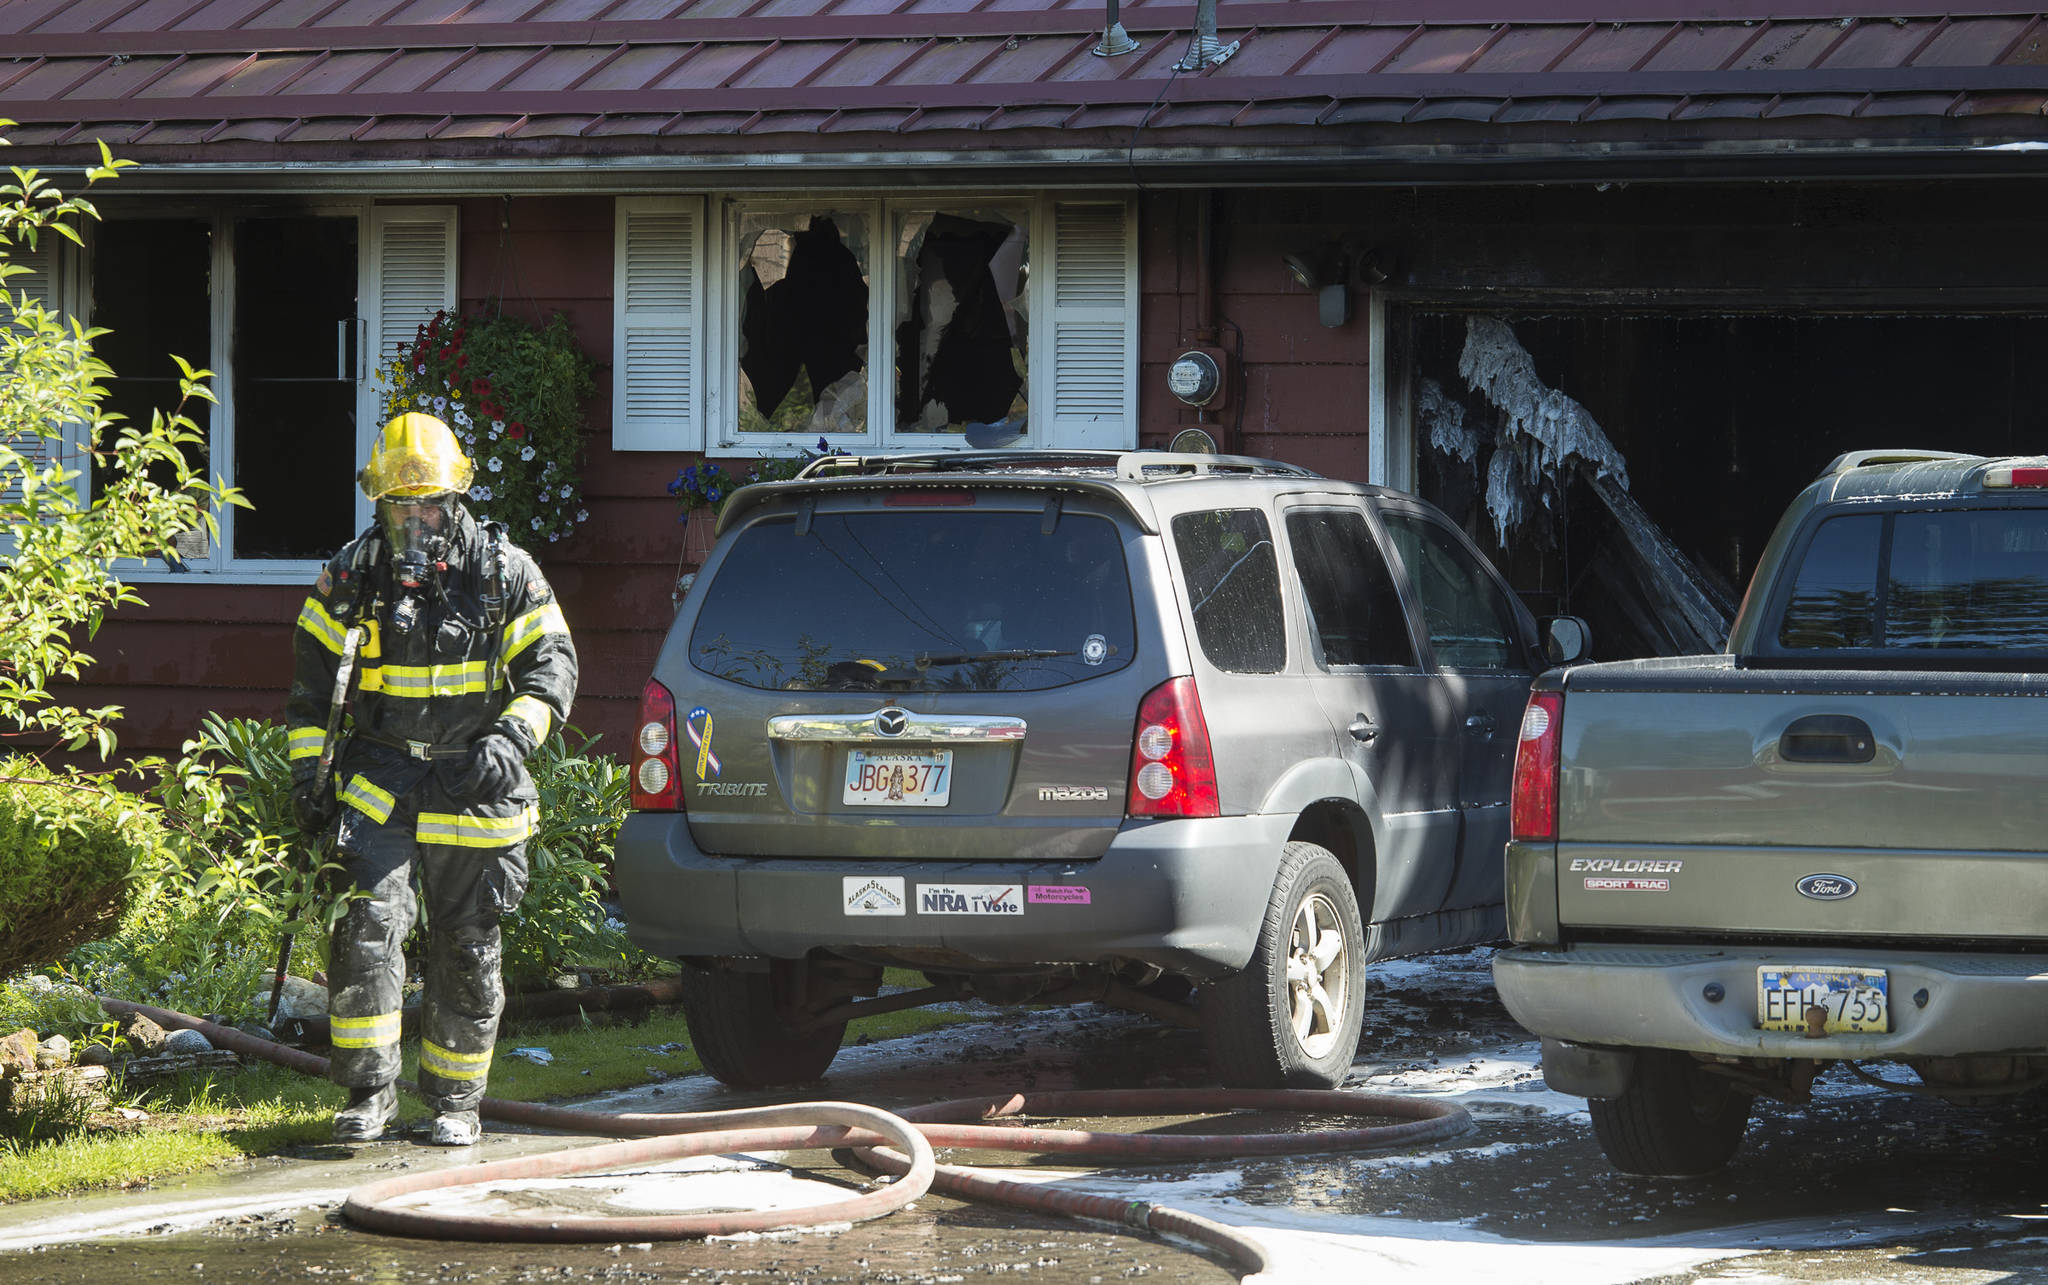 A Capital City Fire/Rescue fireman walks away after fighting a house fire at 8460 Kimberly Street on Friday, July 20, 2018. (Michael Penn | Juneau Empire)